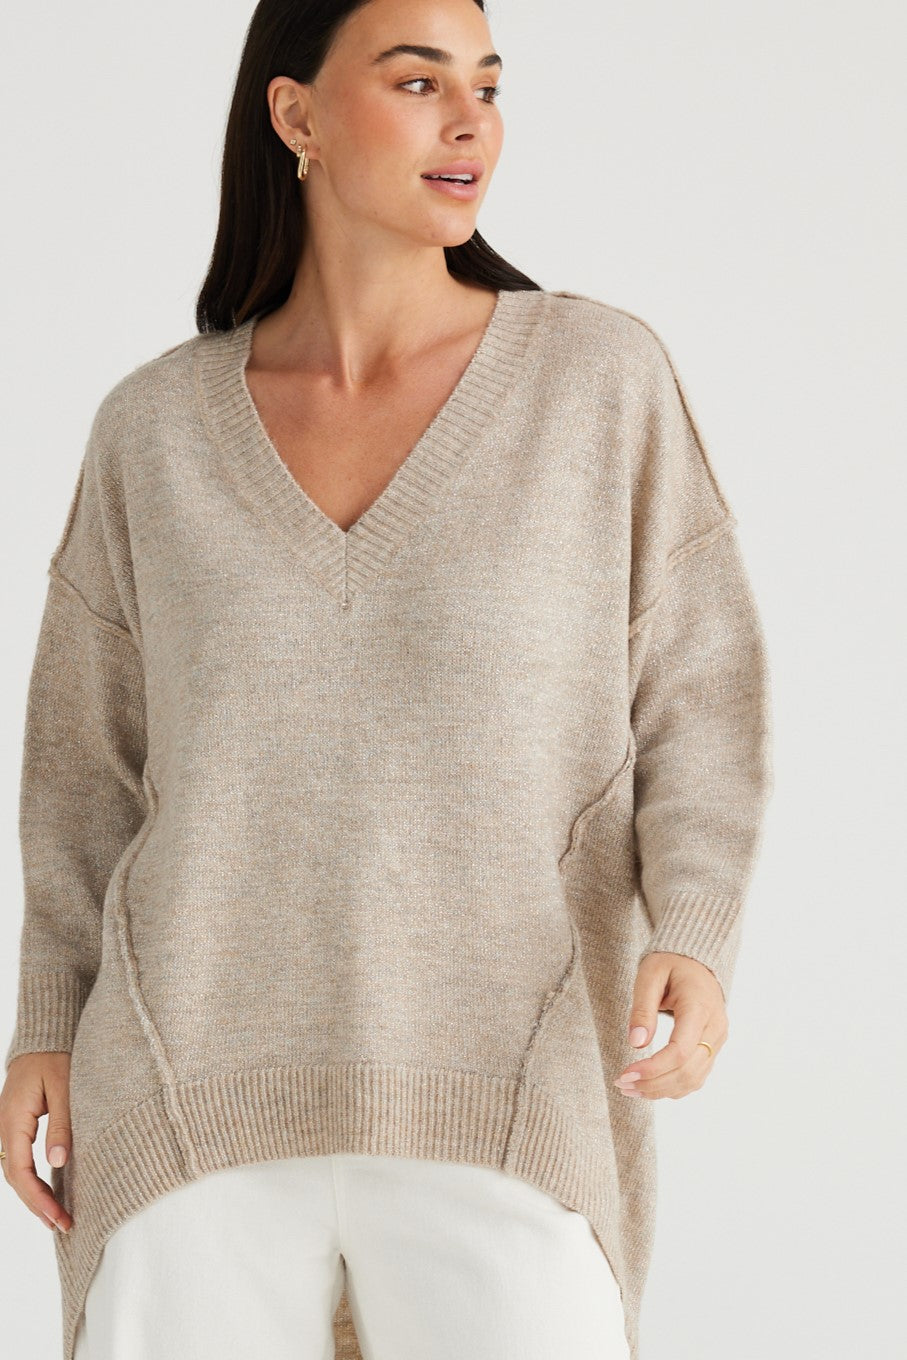 Wiltshire Knit - Natural Sparkle